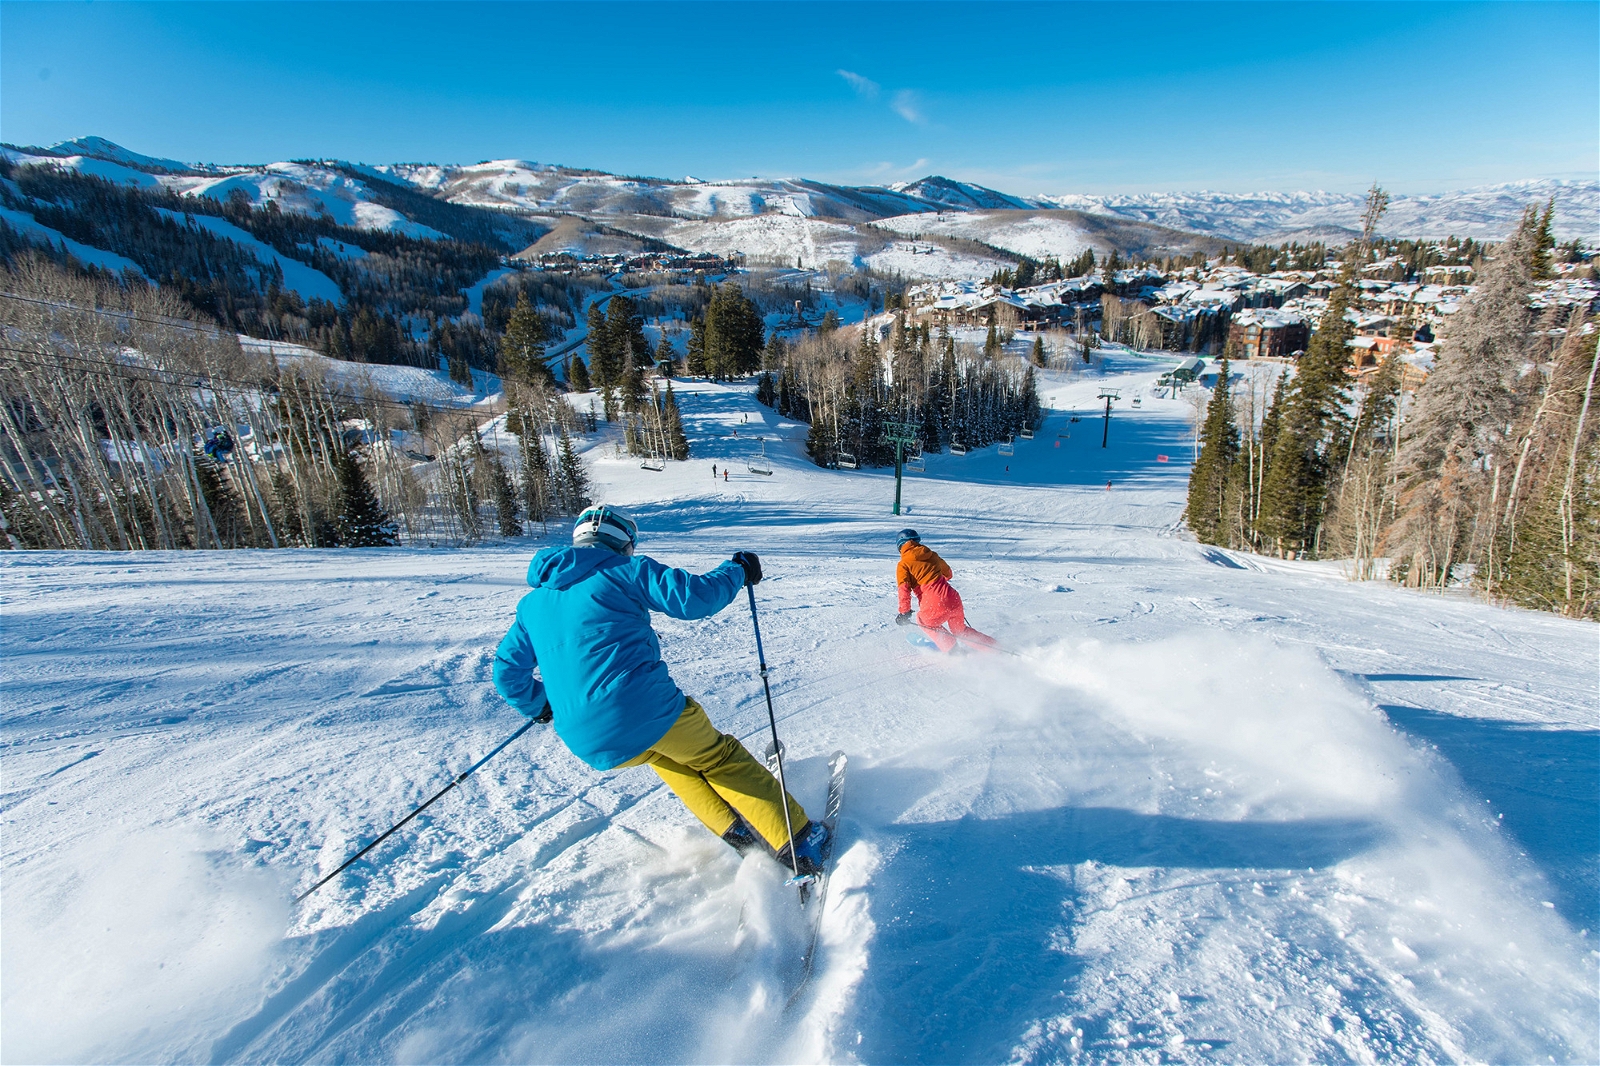 Ski Vacation Package - Stay 5+ nights at Montage Deer Valley and get a $100-150 per day resort credit!